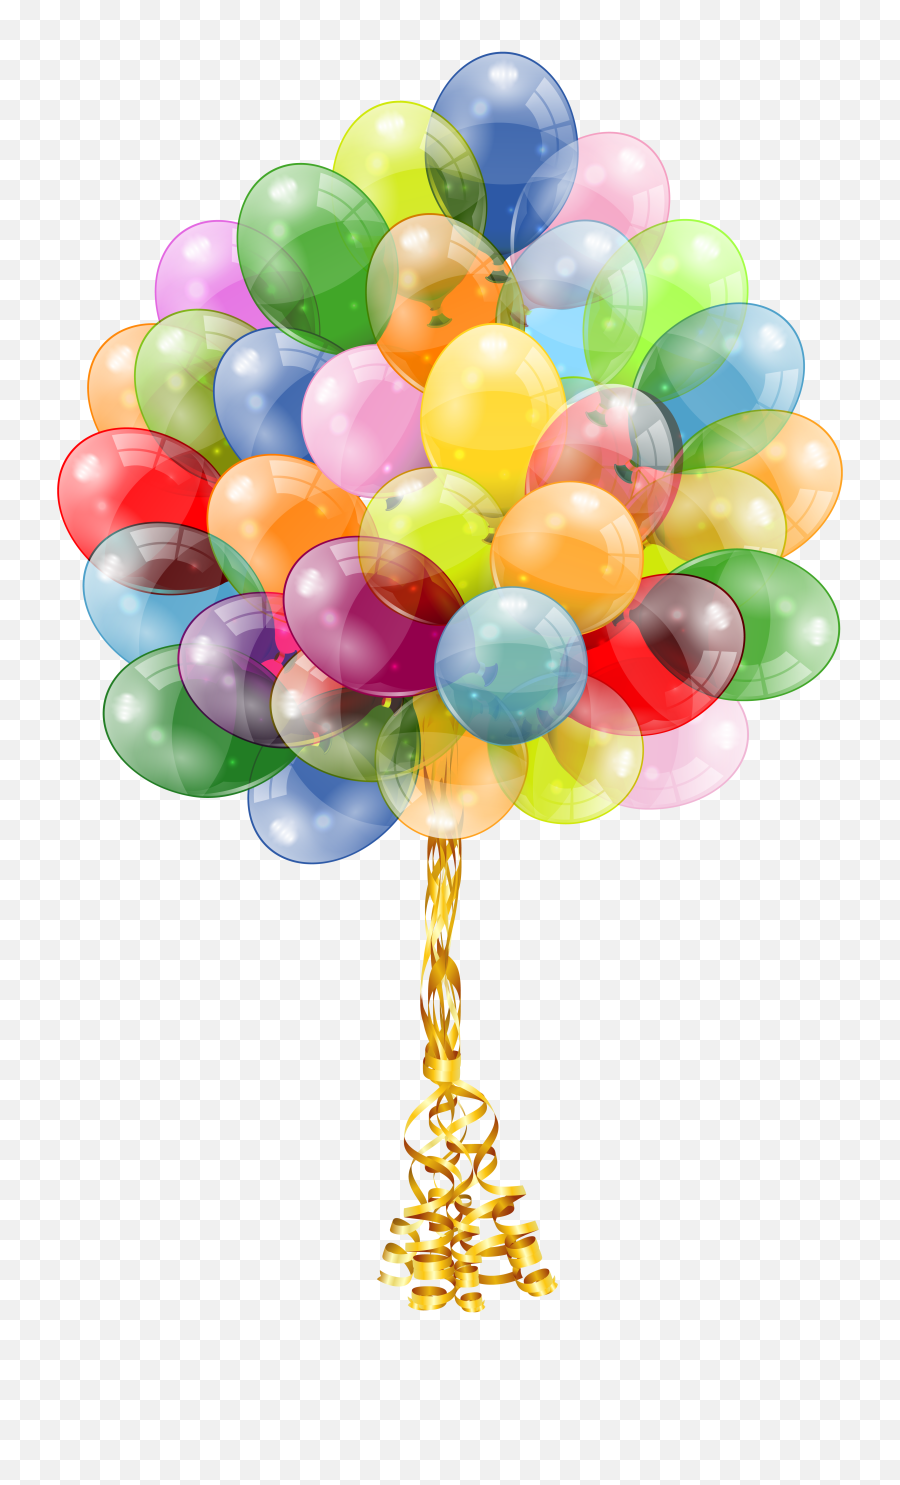 Colorful Balloons Png Download Image Arts - Birthday Bunch Of Balloons,Balloon Png